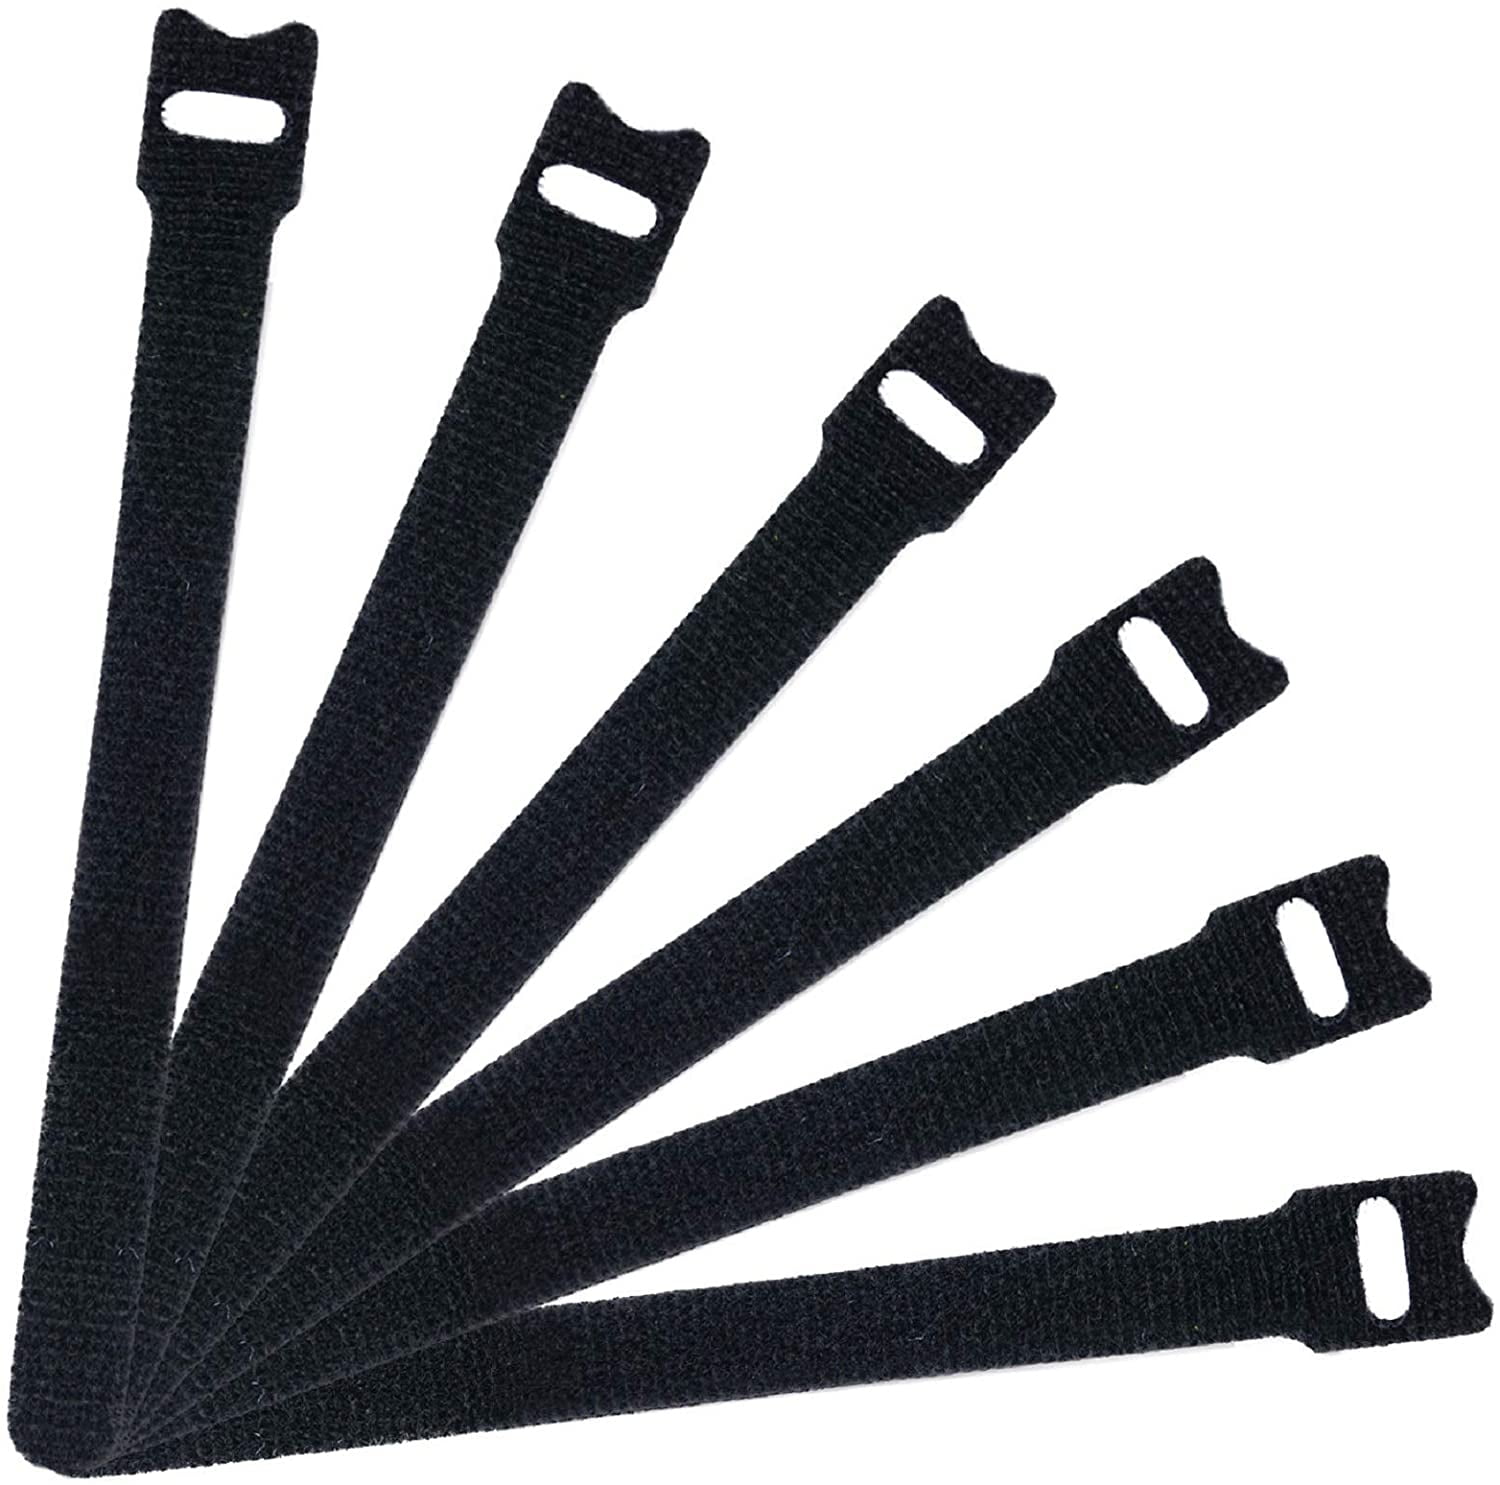 10 x 8" Black Fastener Cable Tie Down Straps Reusable Cord Hook & Loop Fabric 